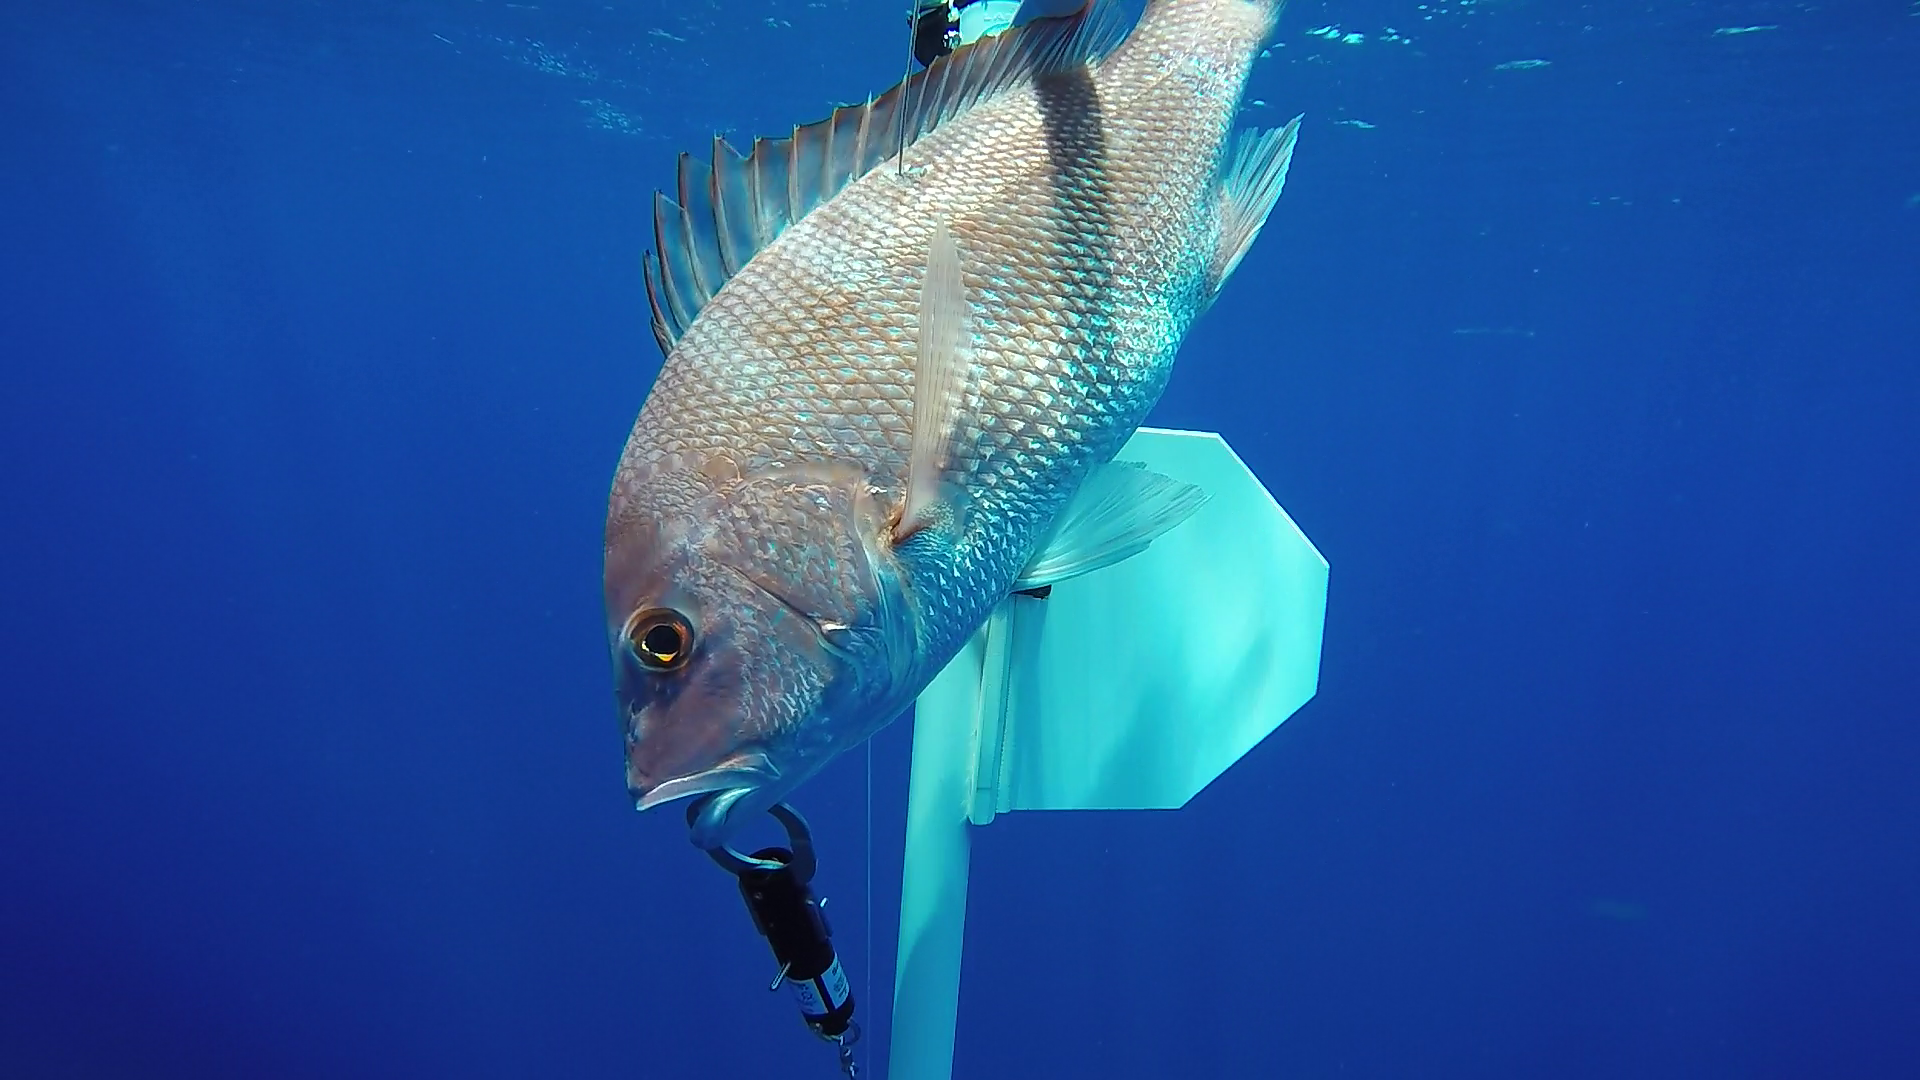 Will Anglers Use Descending Devices on Reef Fish? - Hook, Line and Science